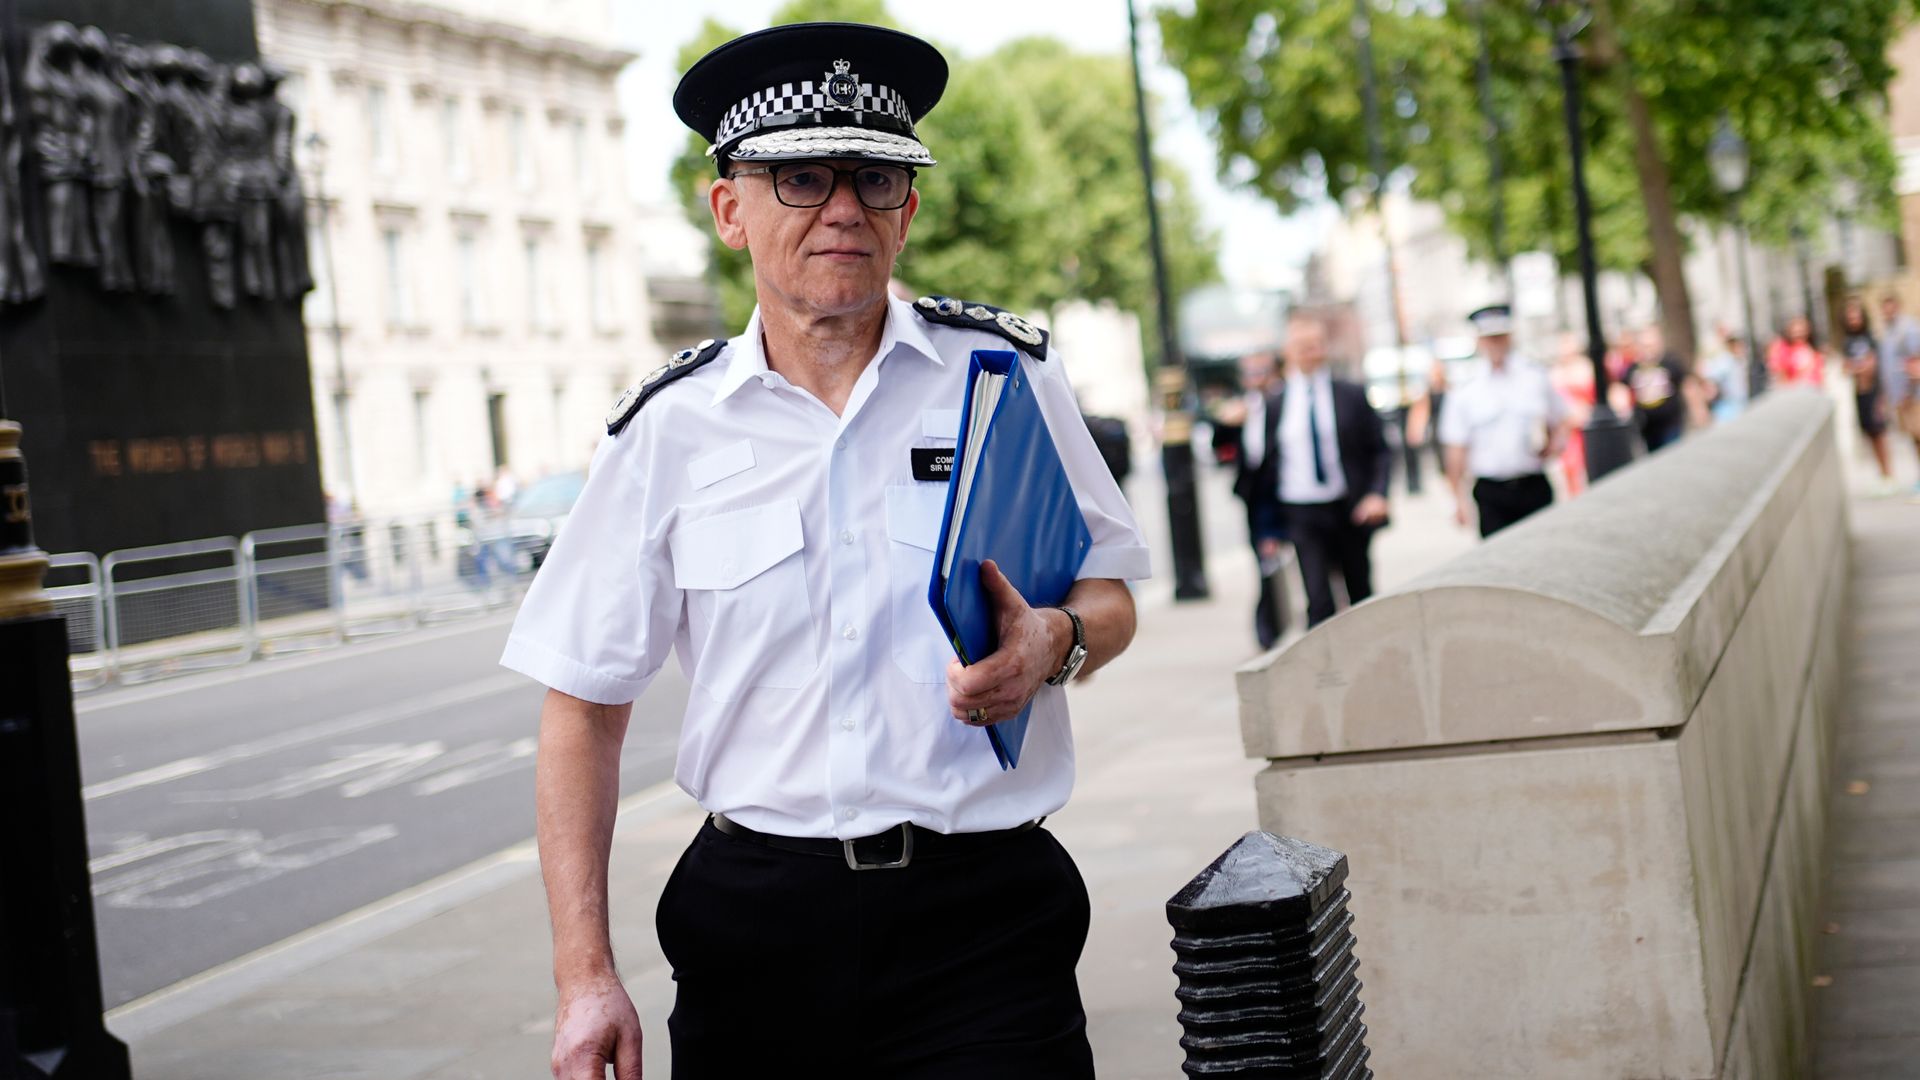 Met Police chief was 'in a hurry' after throwing Sky News journalist's microphone